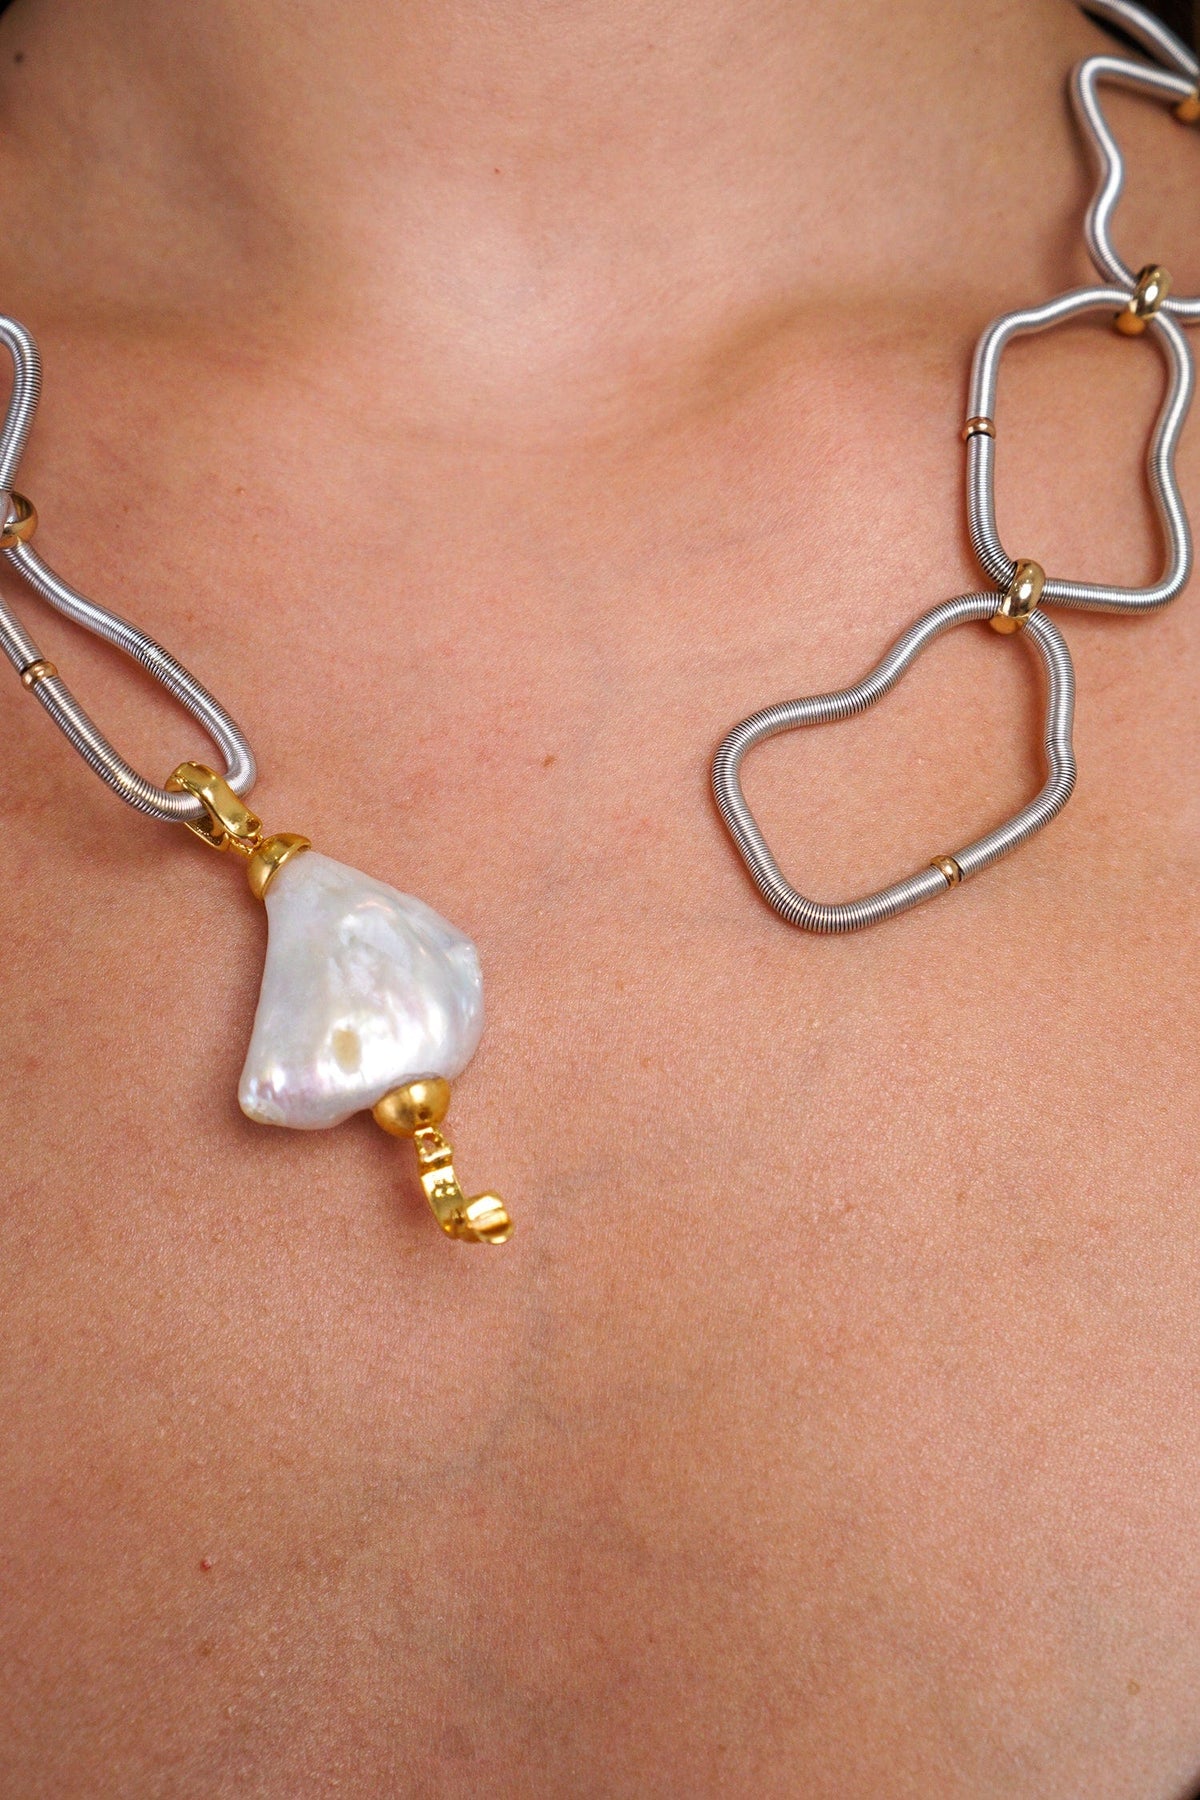 DCD NECKLACES 1 Silver Baroque Shaped Wire Chain With Gold Rings And Large Biwa Pearls Necklace